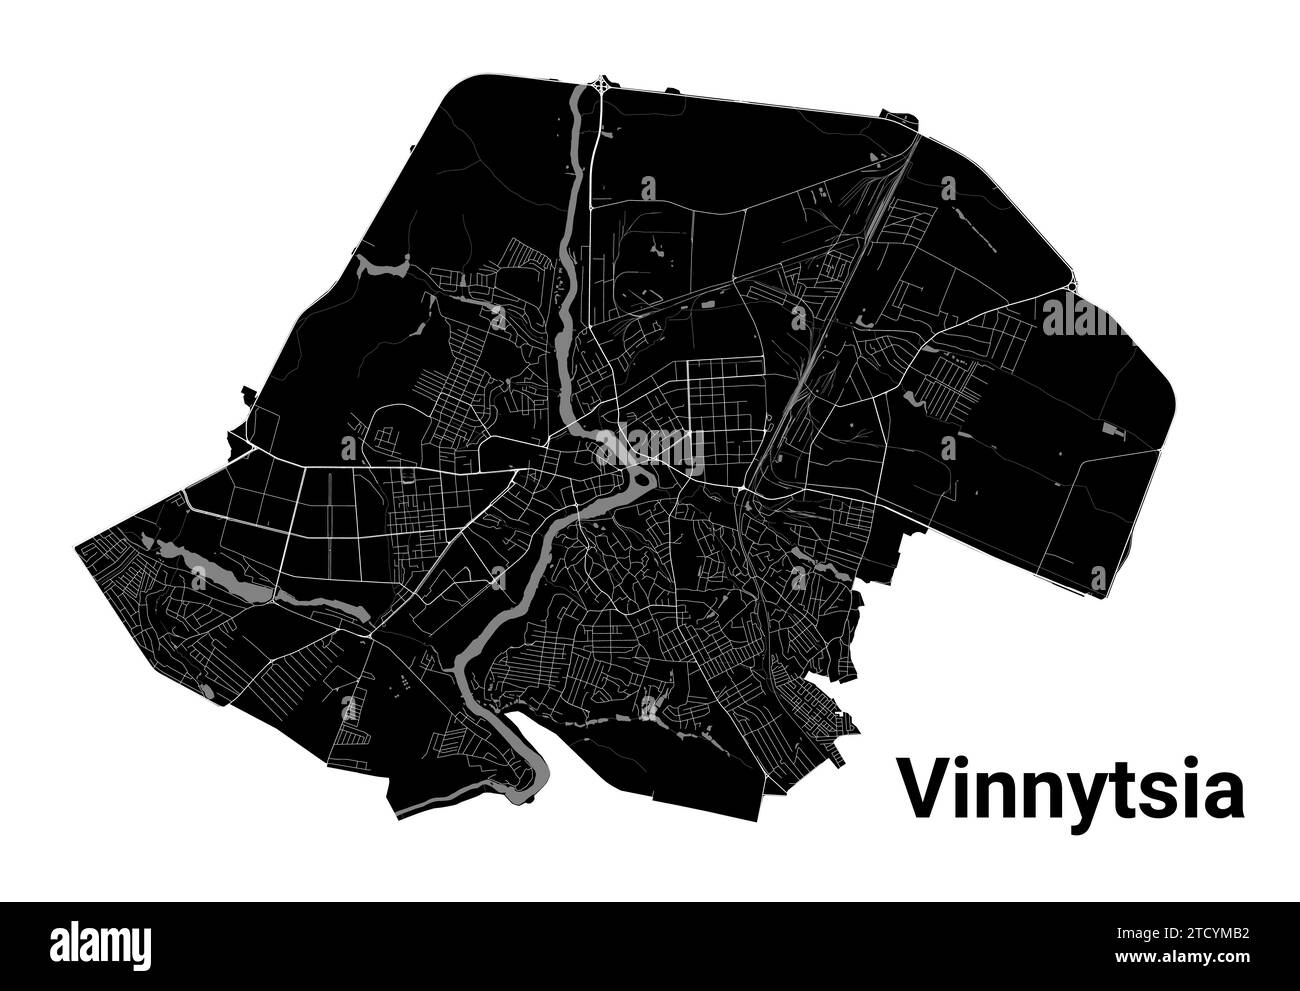 Vinnytsia city map, Ukraine. Municipal administrative borders, black and white area map with rivers and roads, parks and railways. Vector illustration Stock Vector